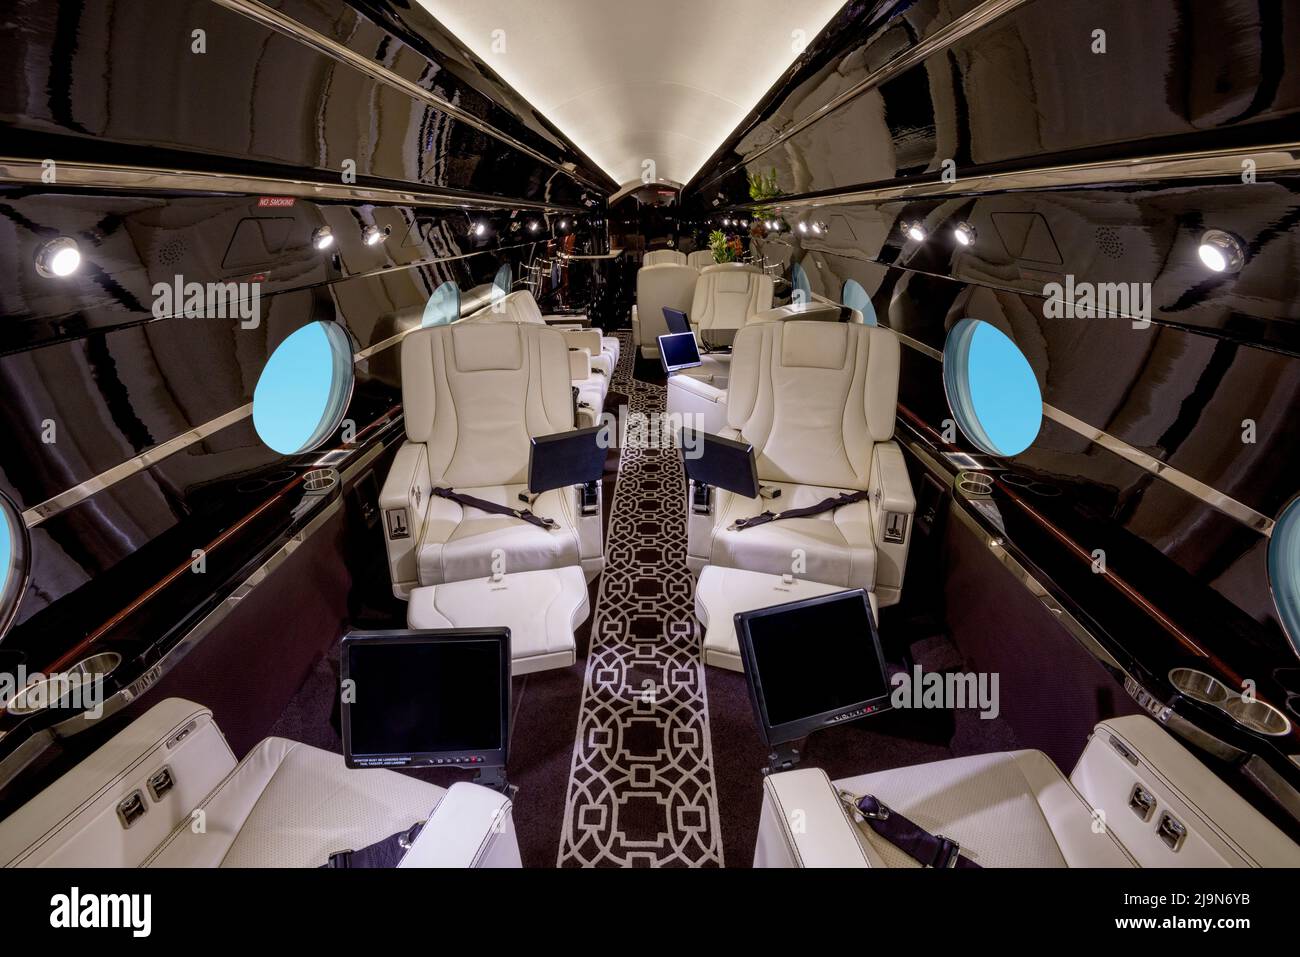 Interior of a business private jet - stock photo Stock Photo